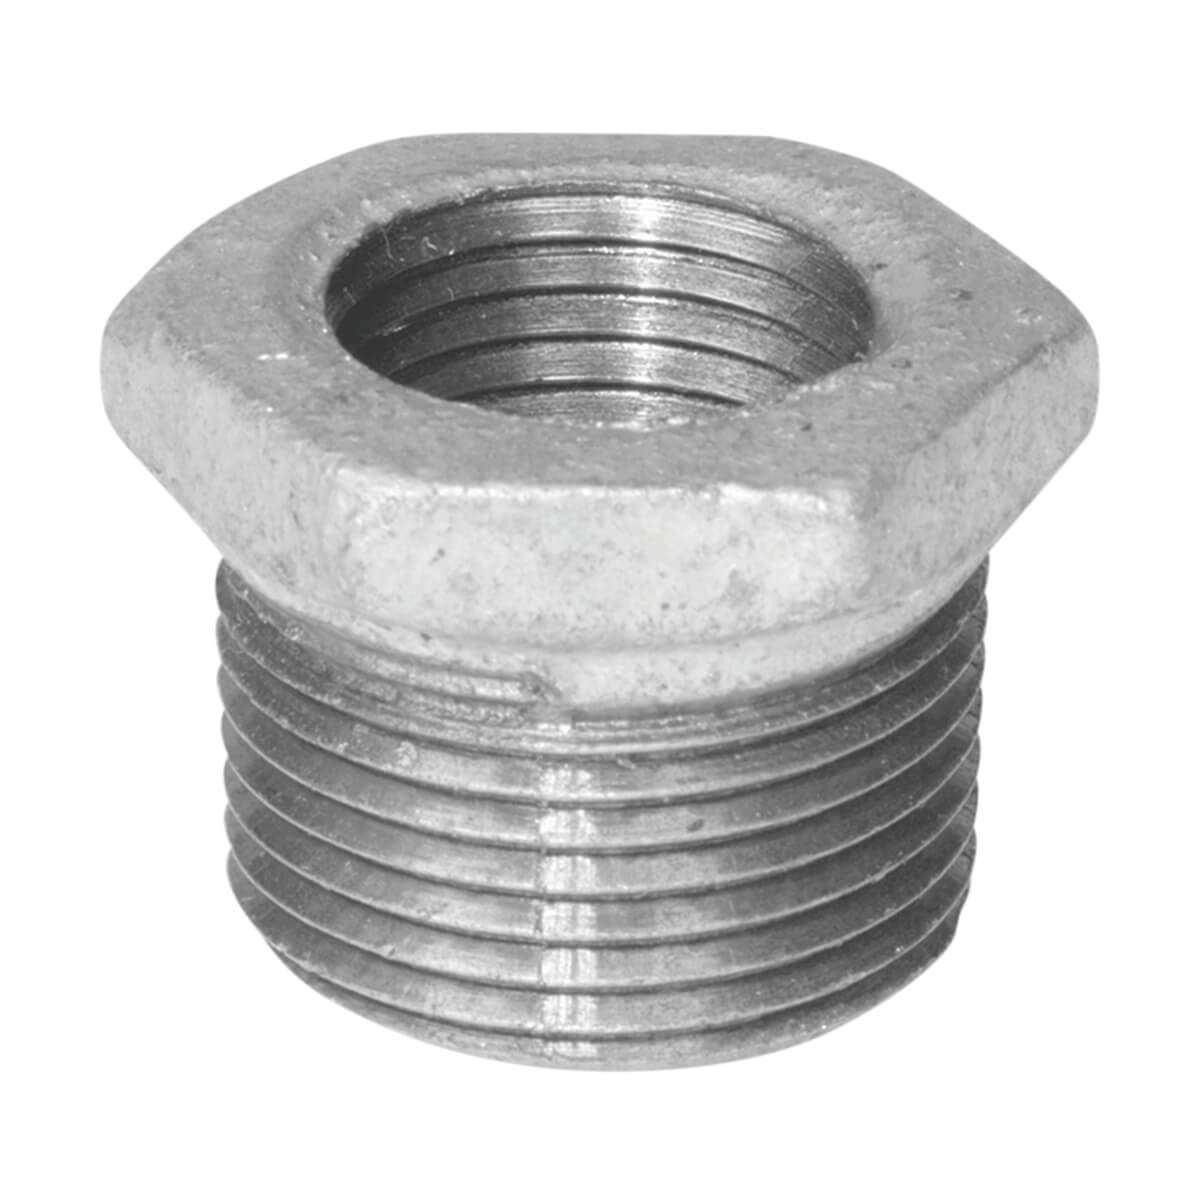 Fitting Galvanized Iron Hex Bushing - 2-in x 1/2-in